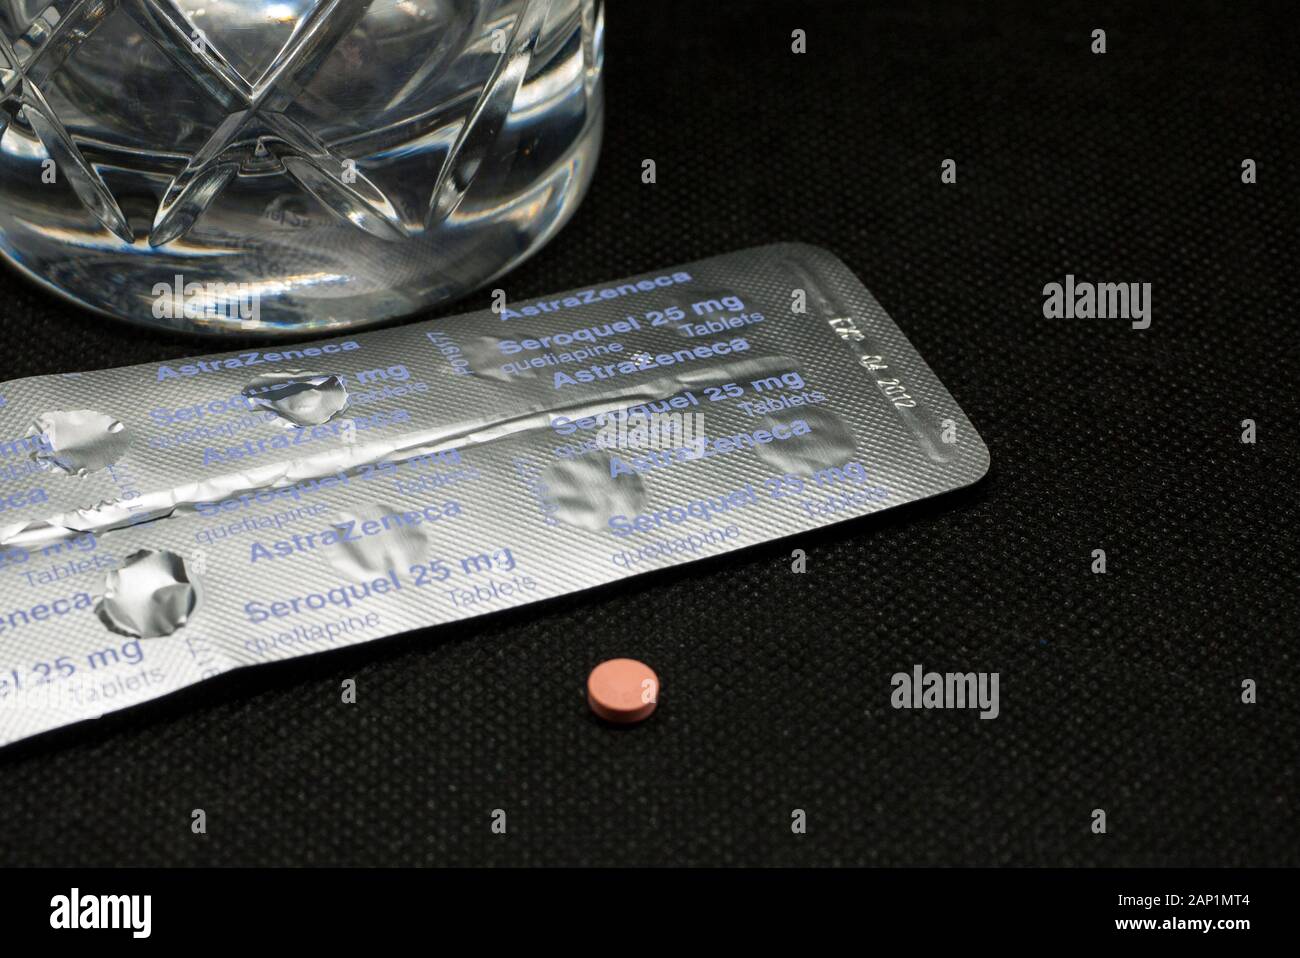 Blister Pack of Seroquel Tablets, UK. Stock Photo